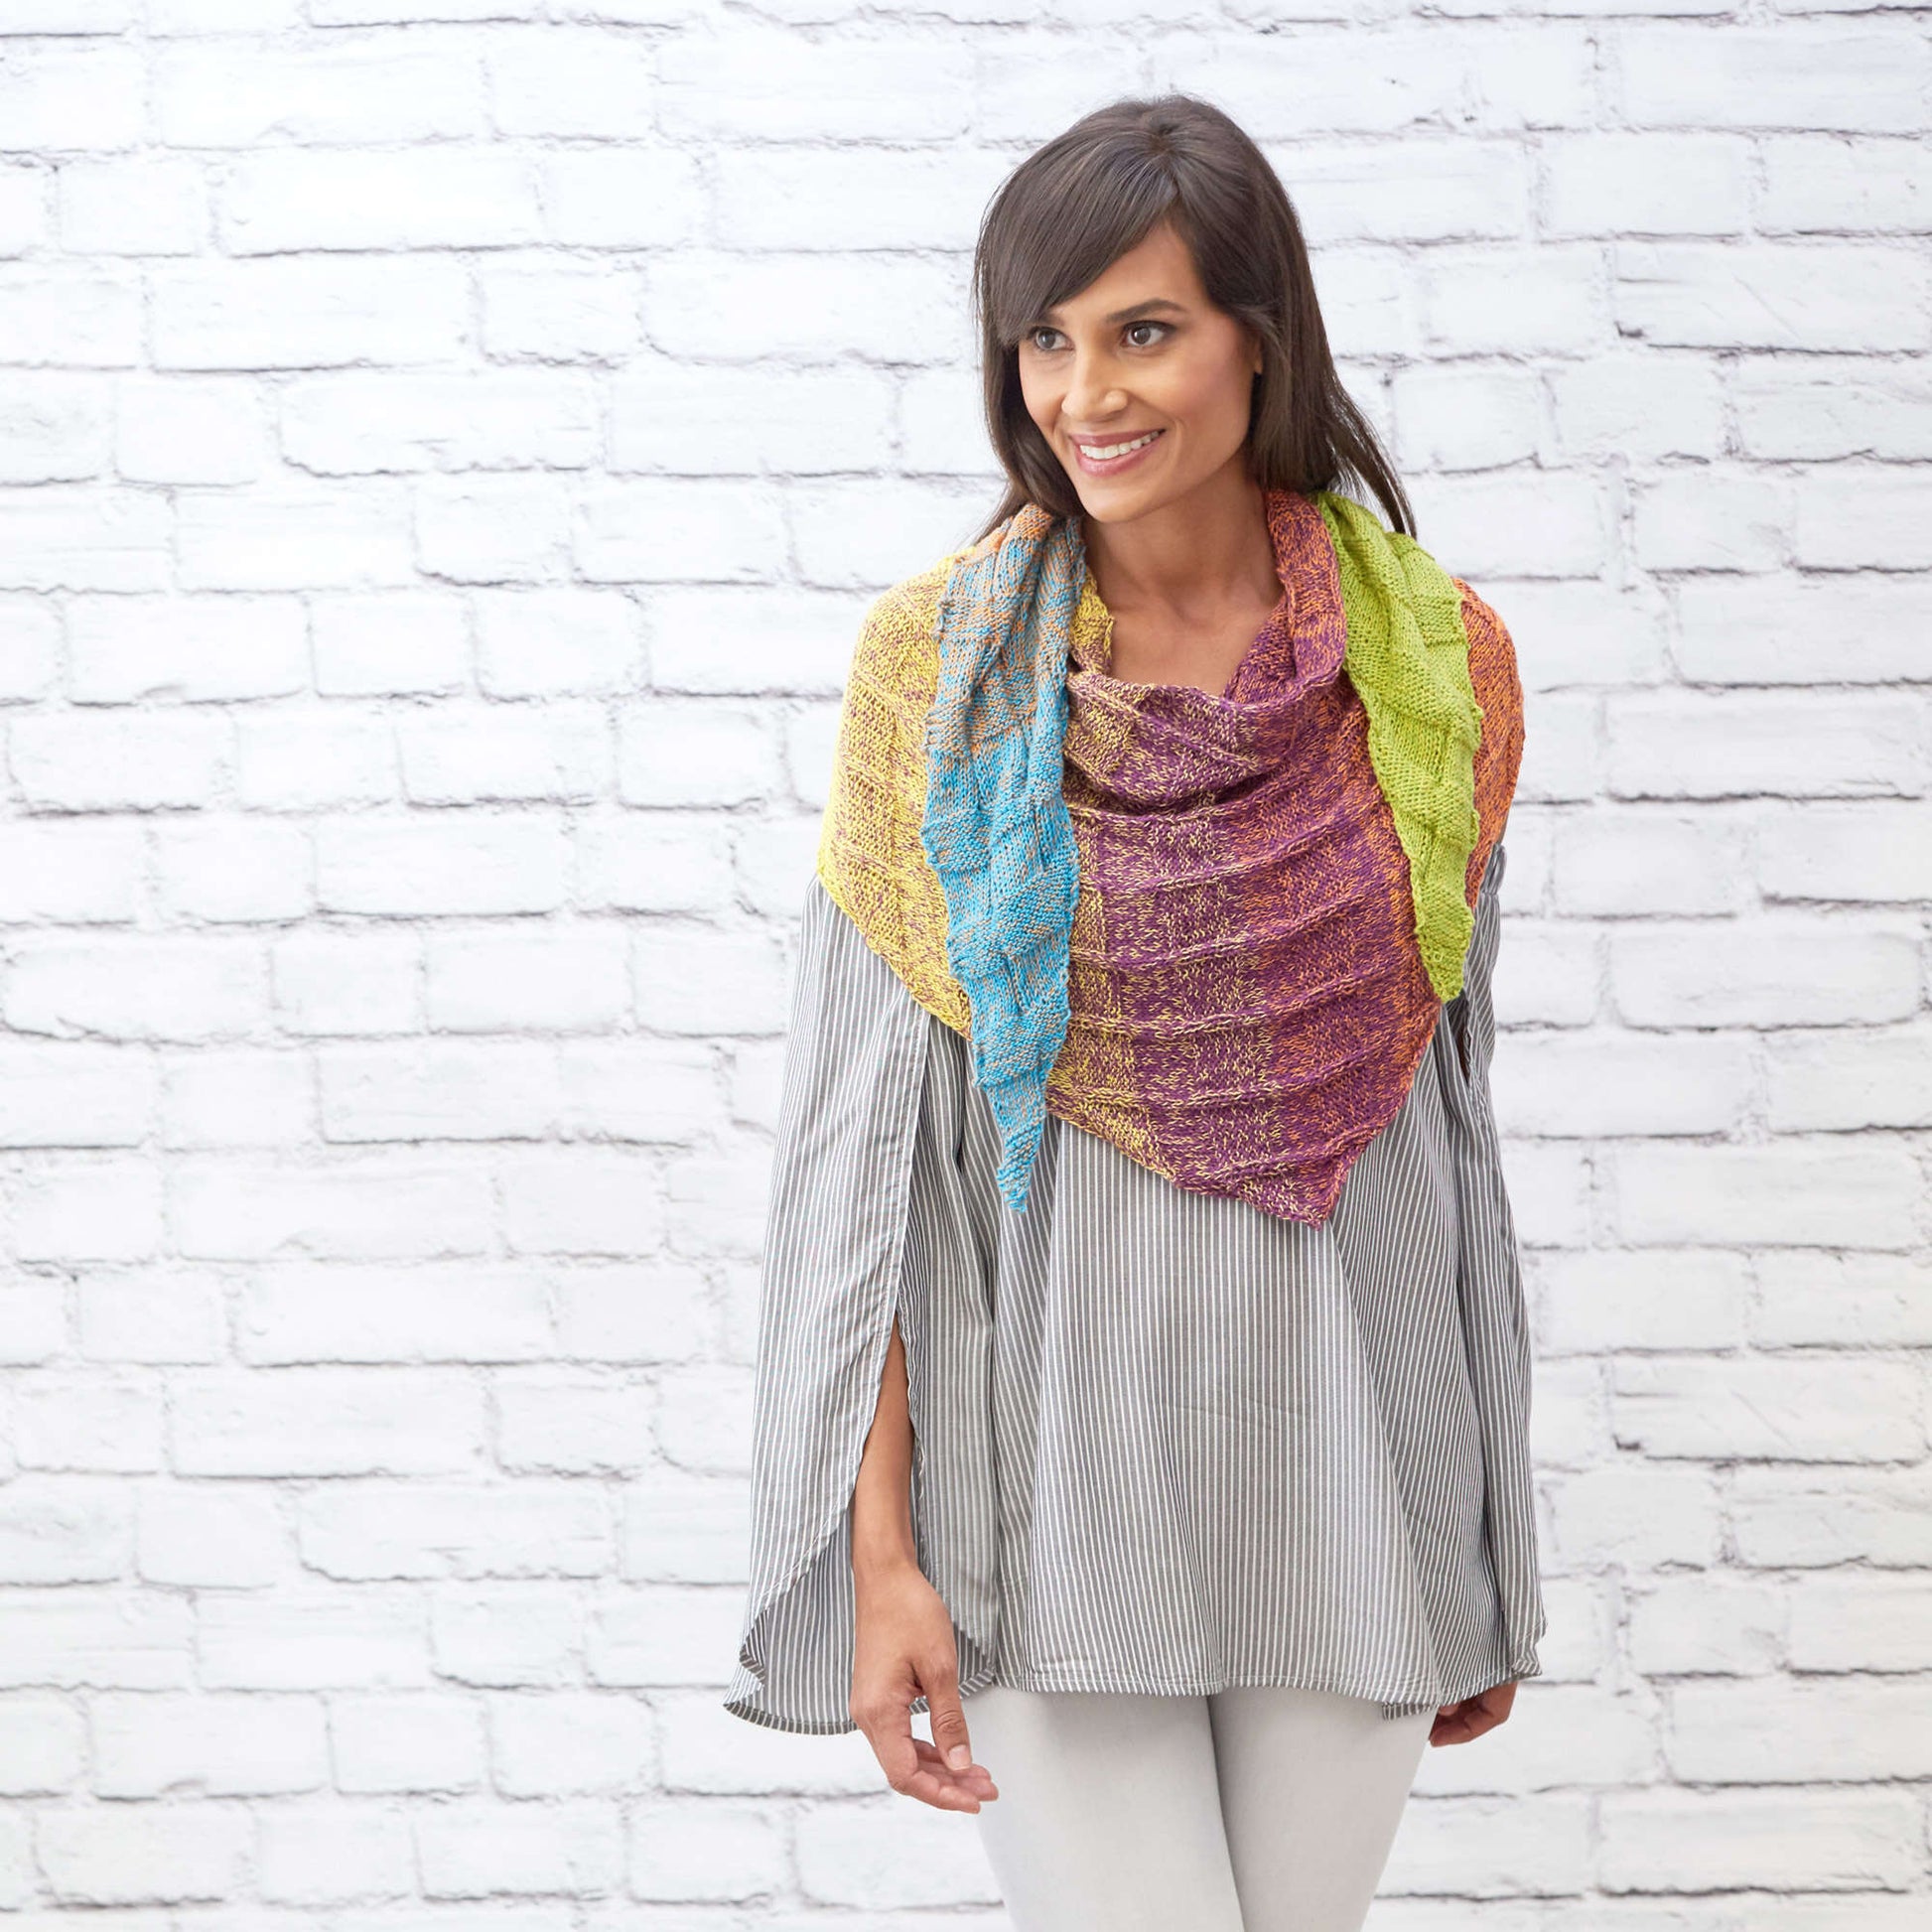 Free Red Heart Knit Small Shapes Shawl Pattern